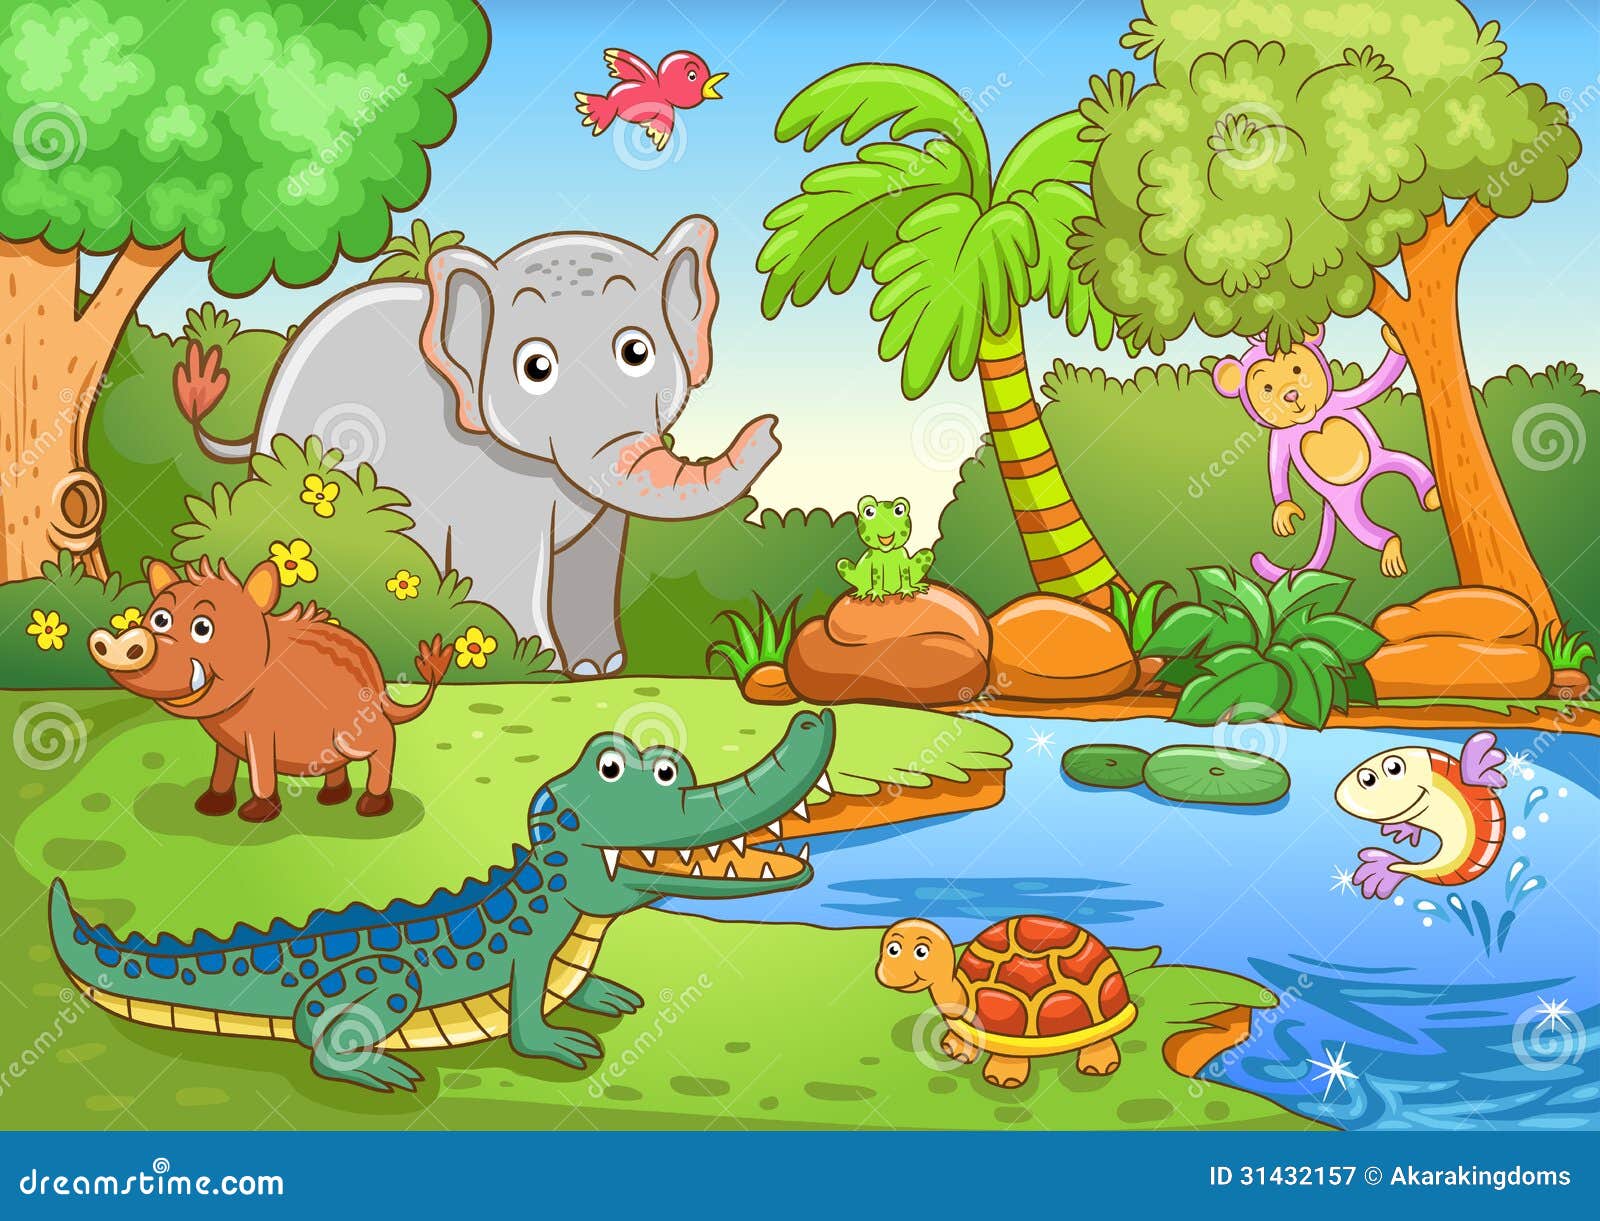 Animals in forest. stock vector. Illustration of colorful - 31432157